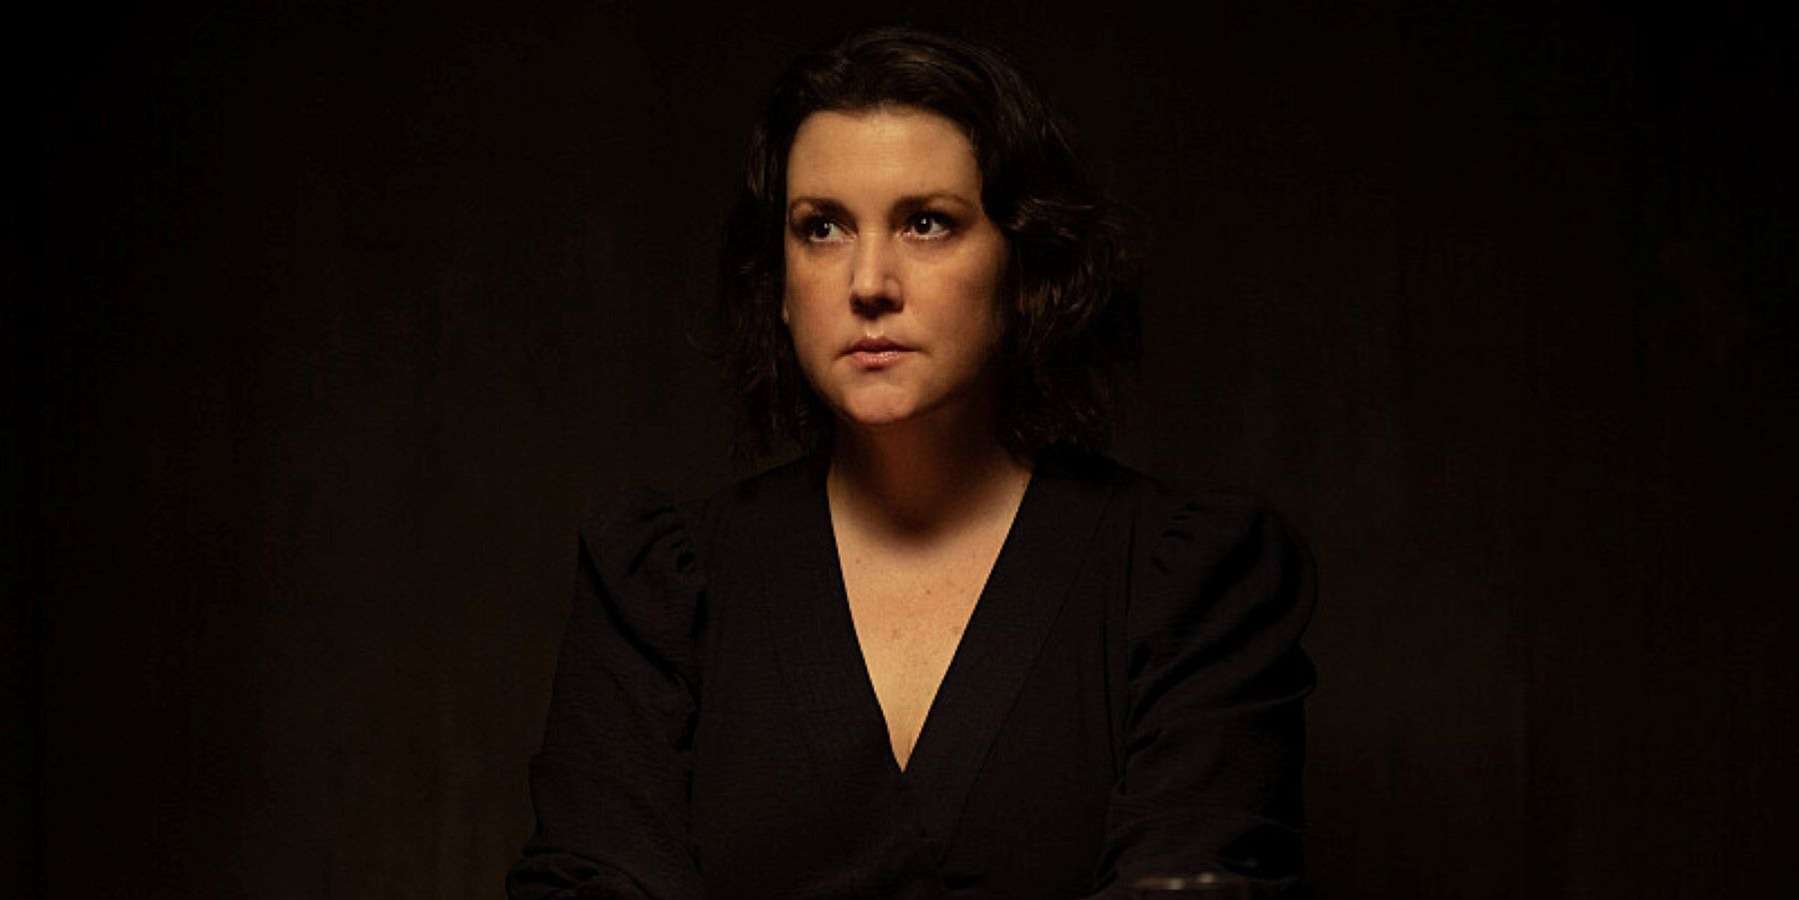 Where Else to Watch Emmy Nominee and ‘Yellowjackets’ Star Melanie Lynskey